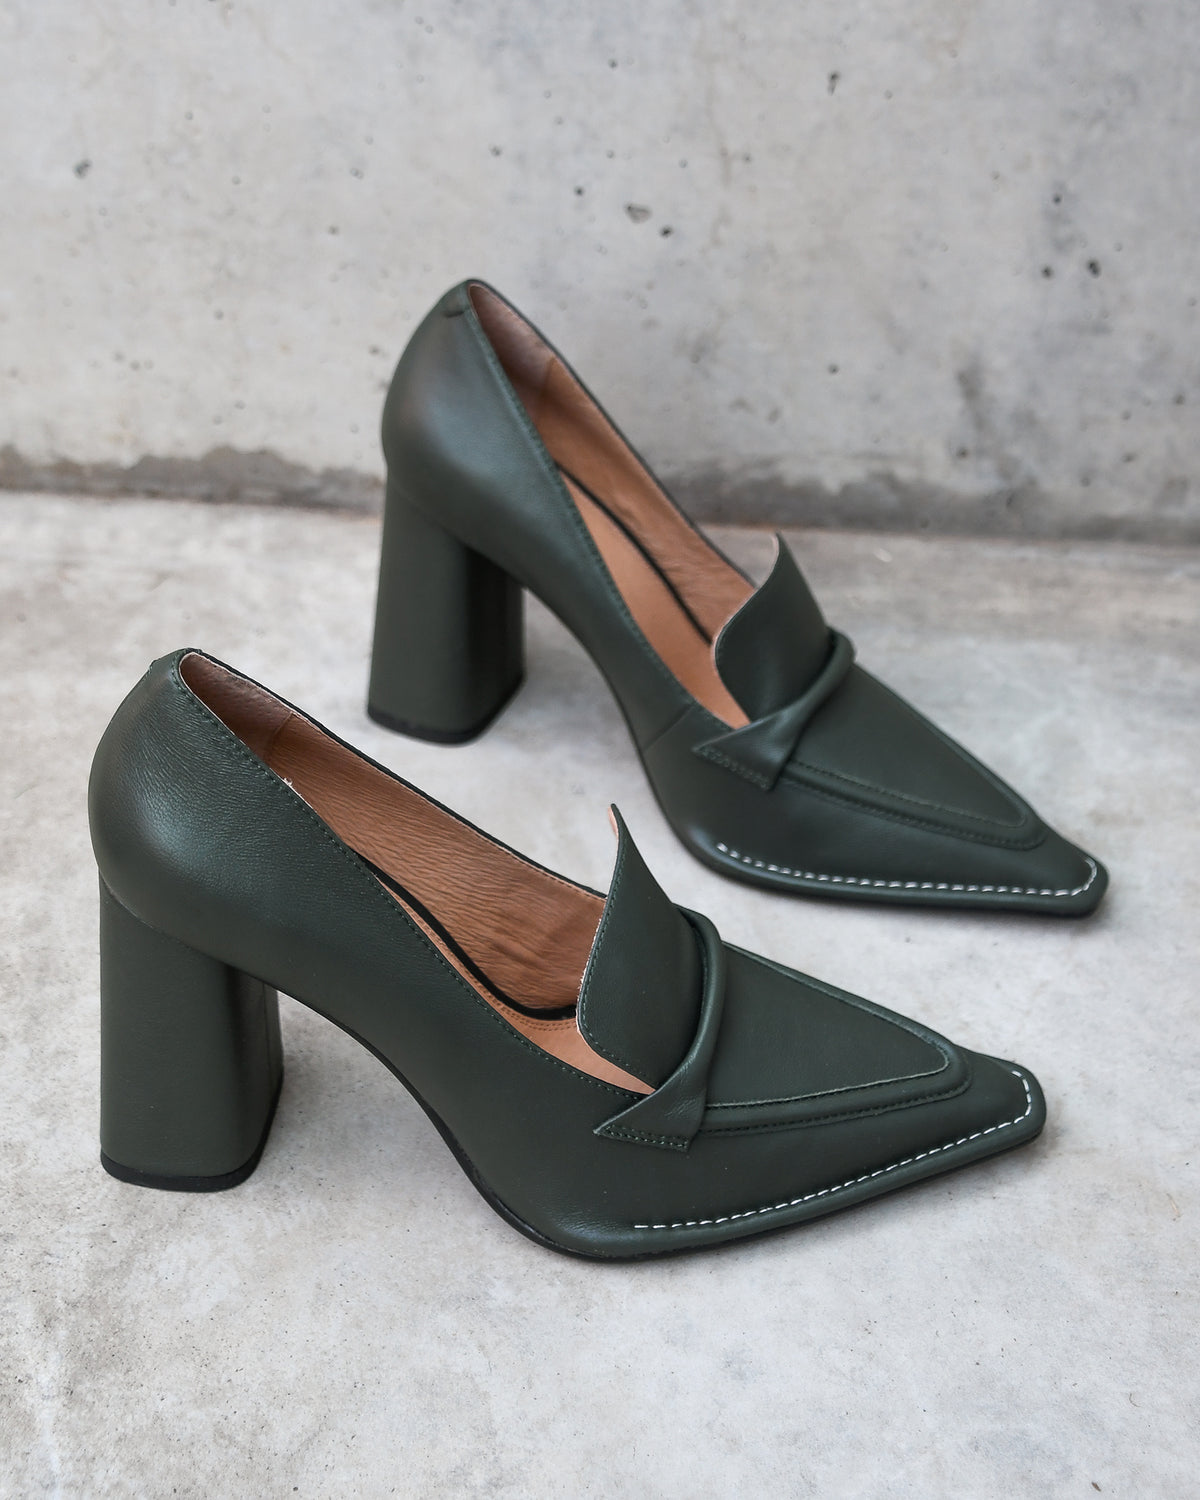 COVET HIGH HEELS OLIVE GREEN LEATHER